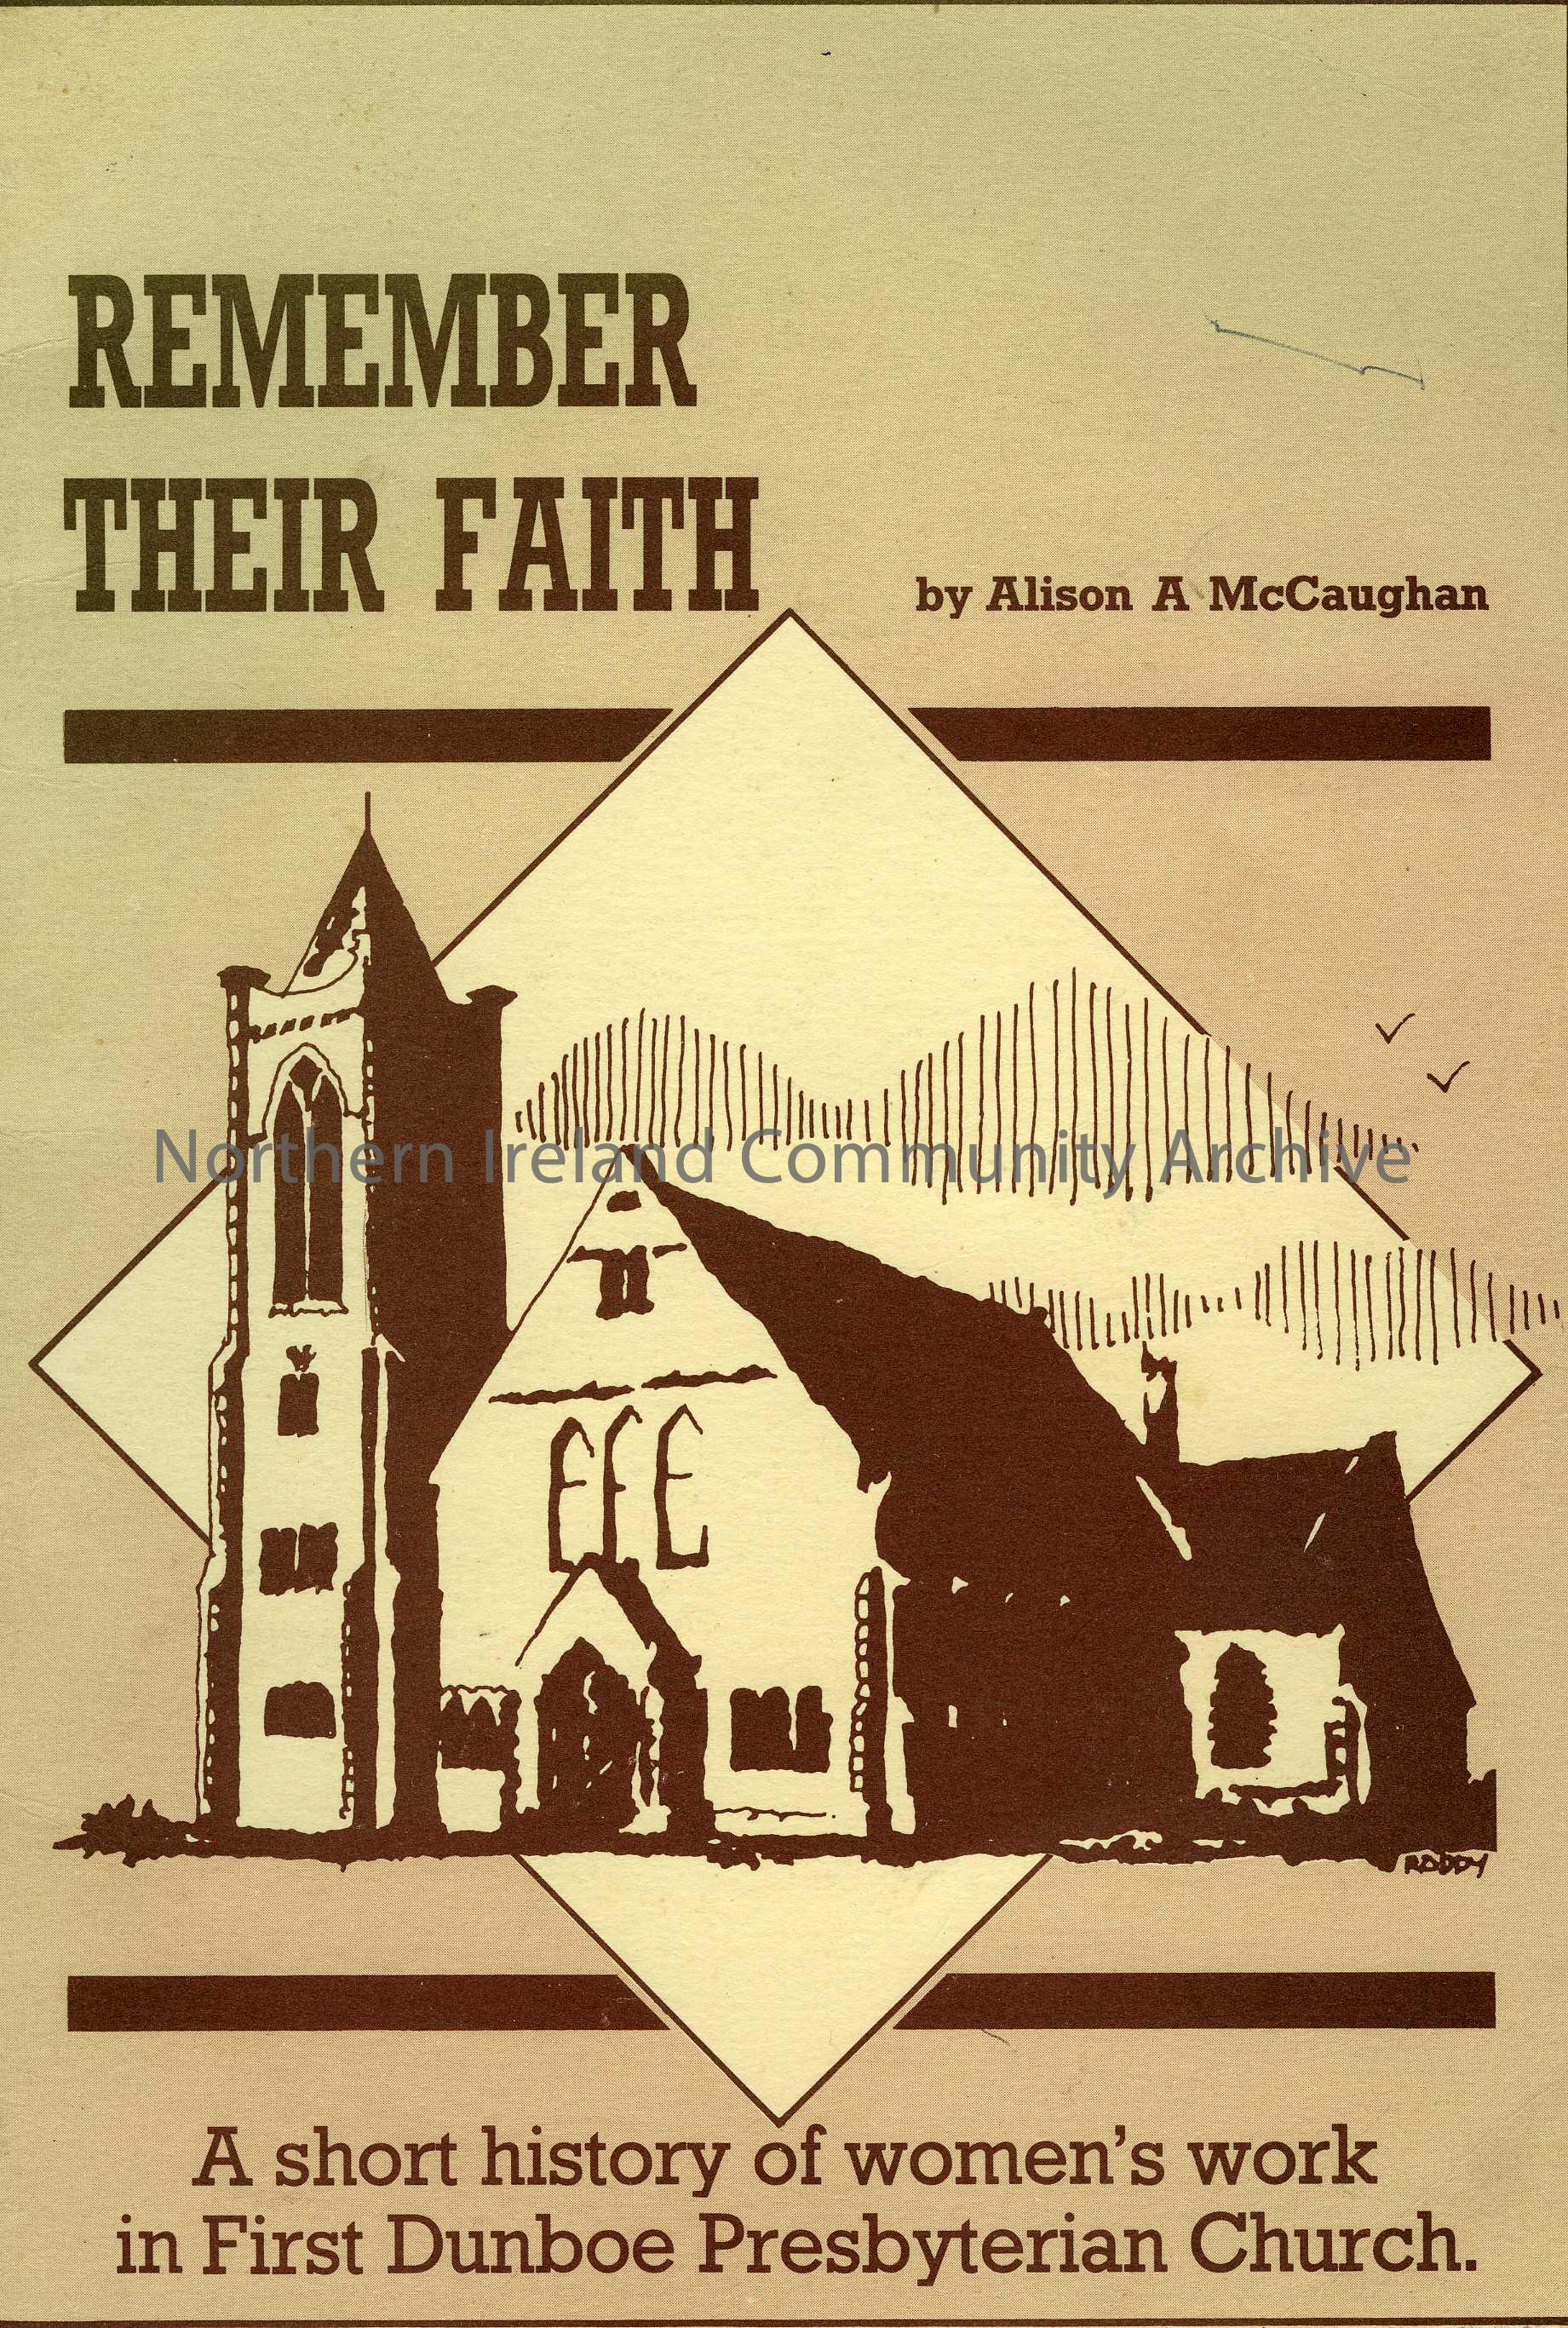 book titled, Remember Their Faith-A short history of women’s work in First Dunboe Presbyterian Church, By Alison A McCaughan (1464)